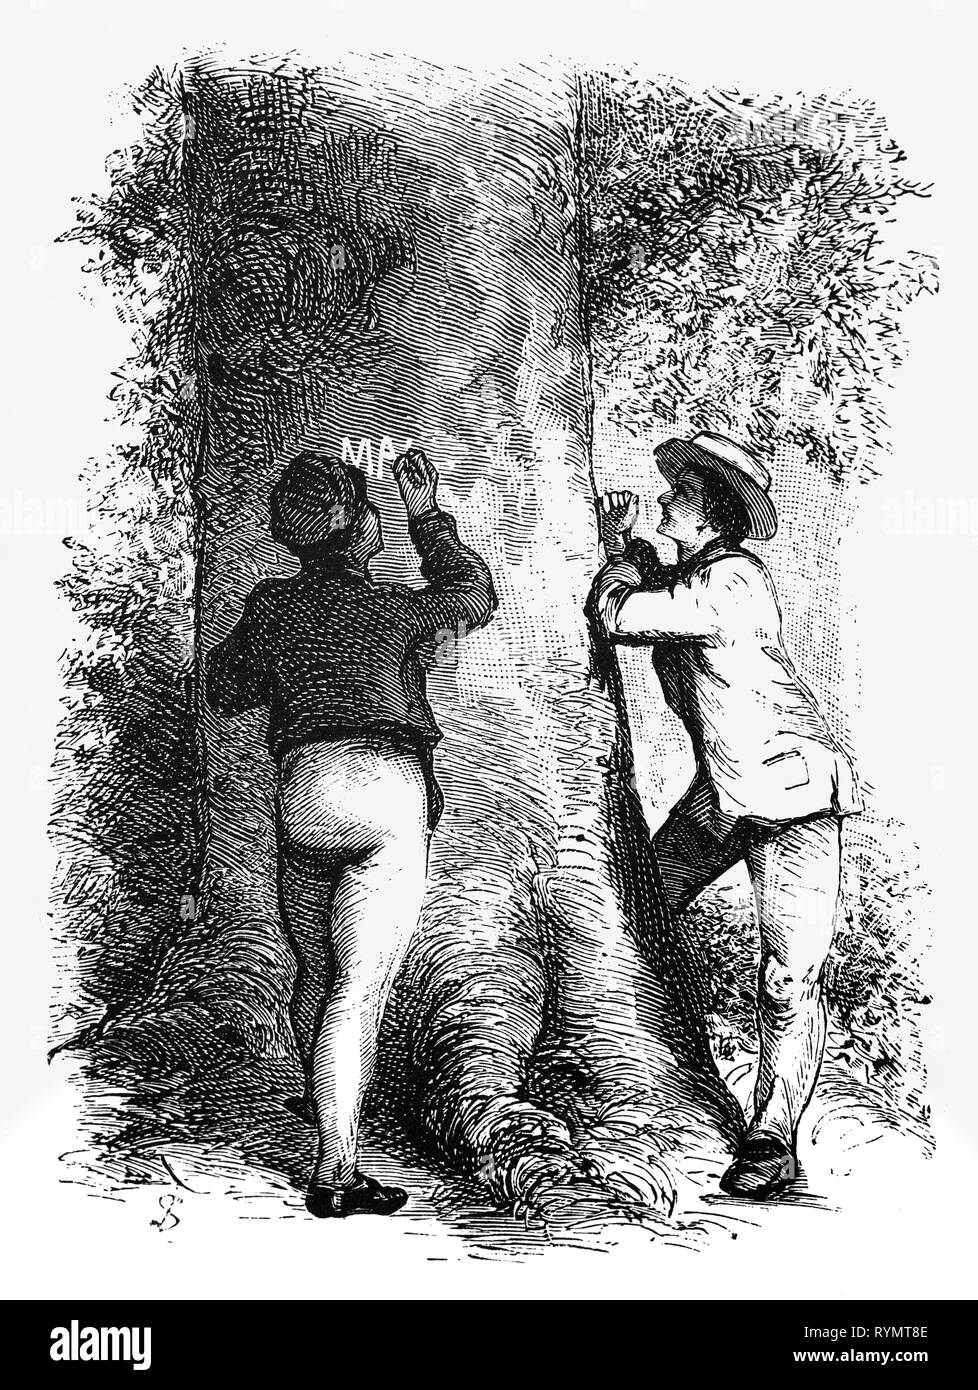 Hildebrand and his friend Antoine were both in love with the same young lady, and when we were busy on our walks, we both cut the same name into a tree. From the Camera Obscura, a 19th Century collection of Dutch humorous-realistic essays, stories and sketches in which Hildebrand, the author, takes an ironic look at the behavior of the 'well-to-do', finding  them bourgeois and without a good word for them. Stock Photo